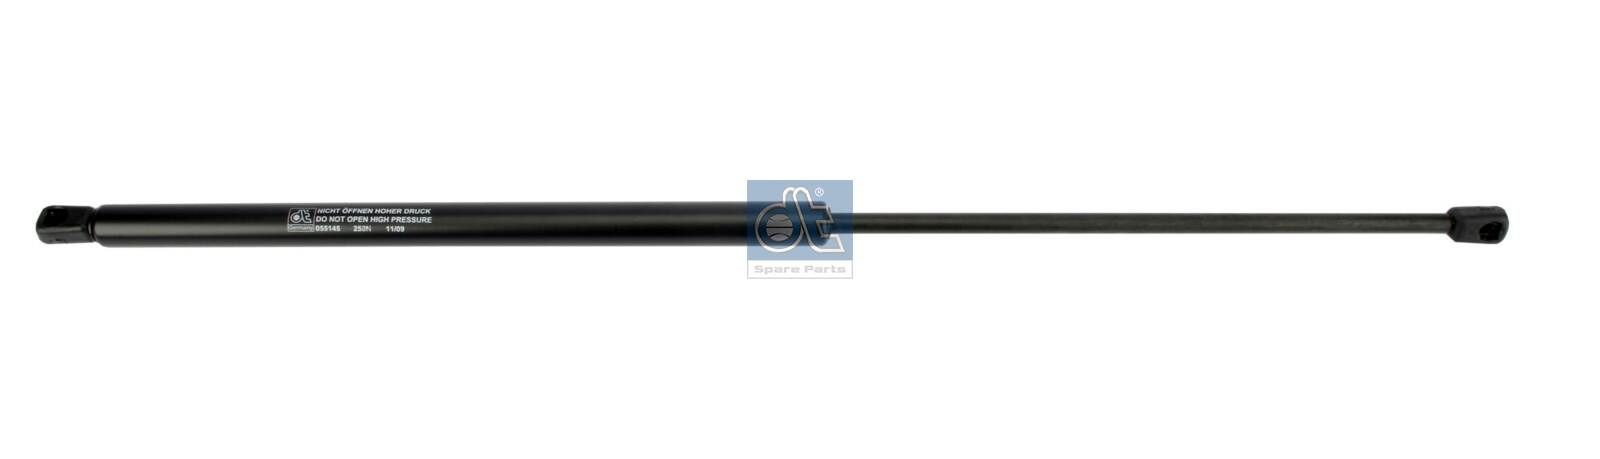 DT Spare Parts 1.23256 Gas Spring 1481373